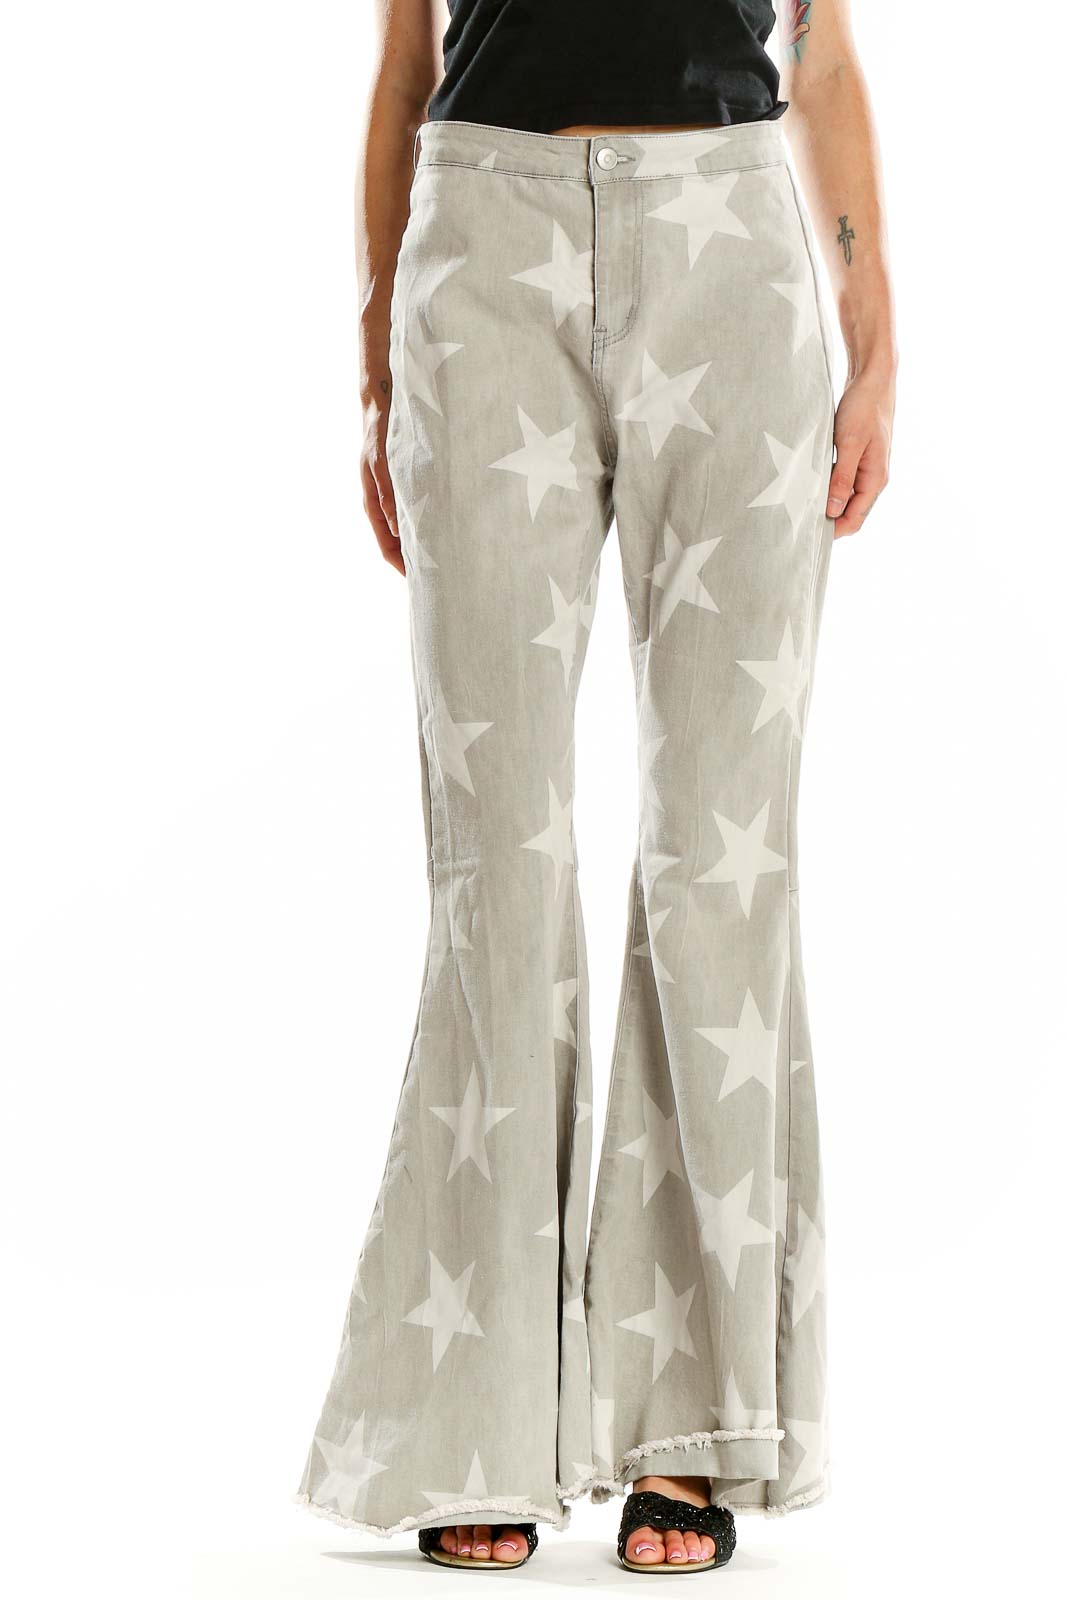 Gray Star Print Flare Jeans Front